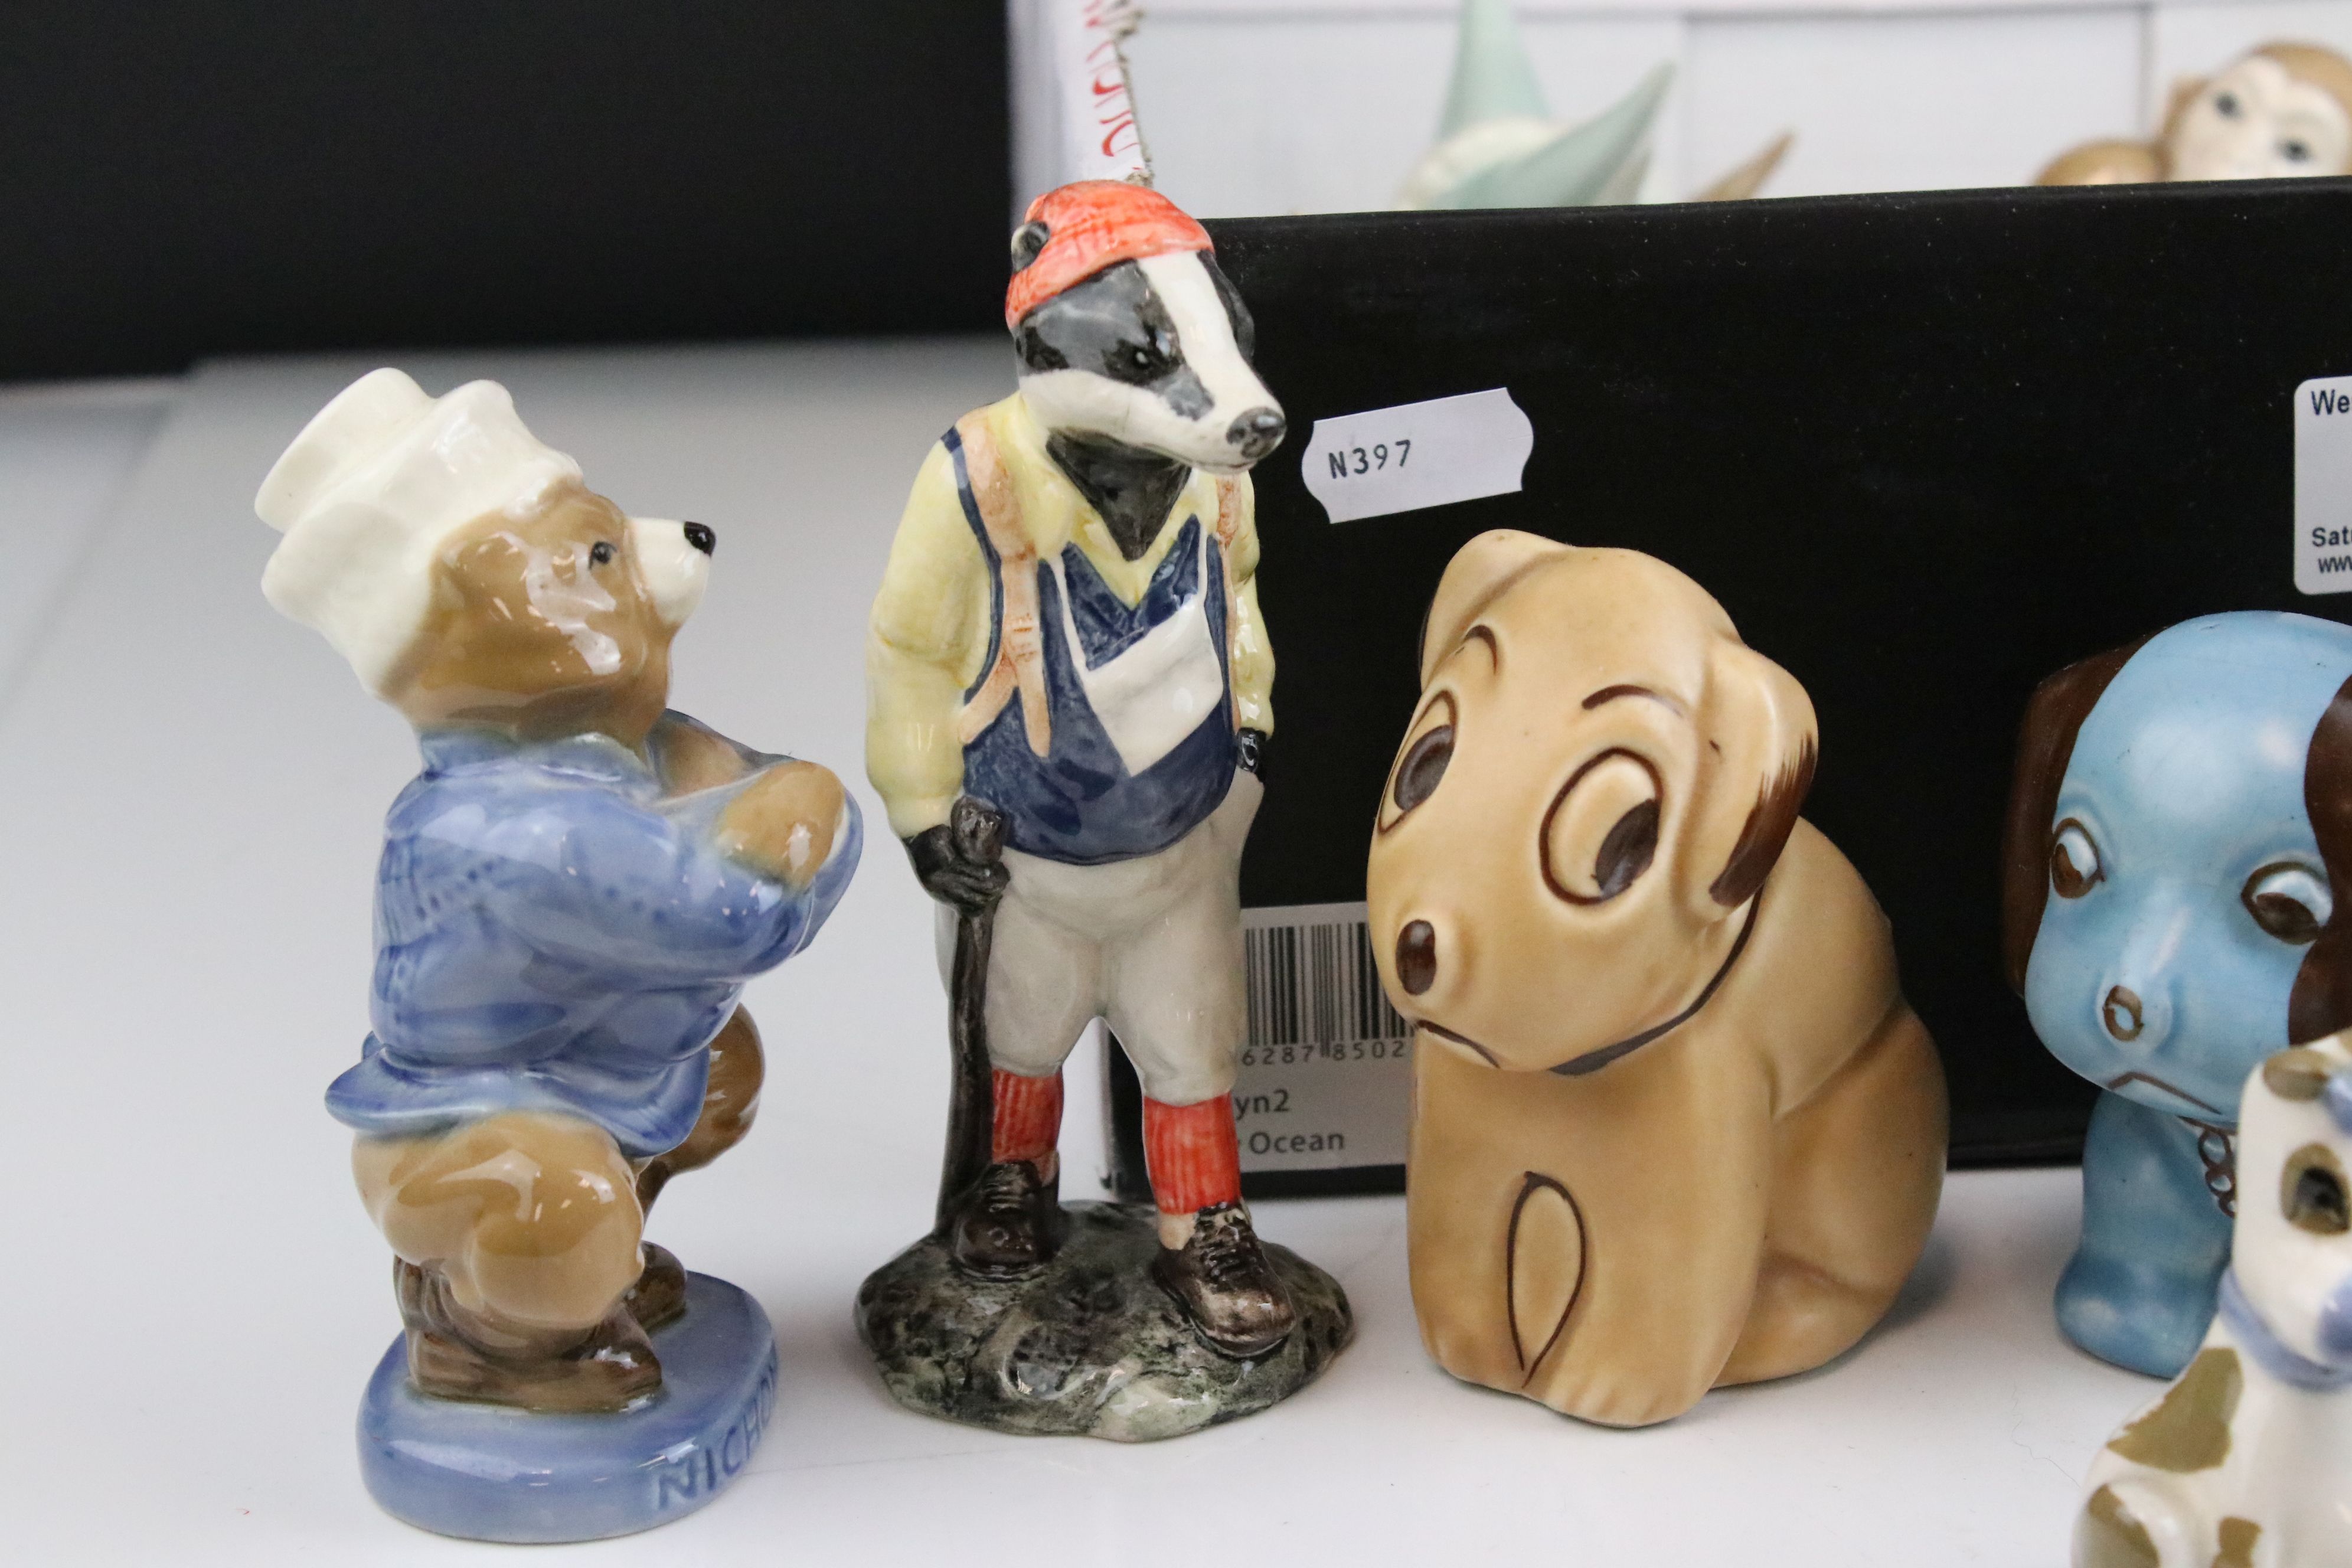 Collection of Ceramic Animals including Szeiler, Beswick, Wade, Sylvac style (approx. 29 in total) - Image 2 of 4